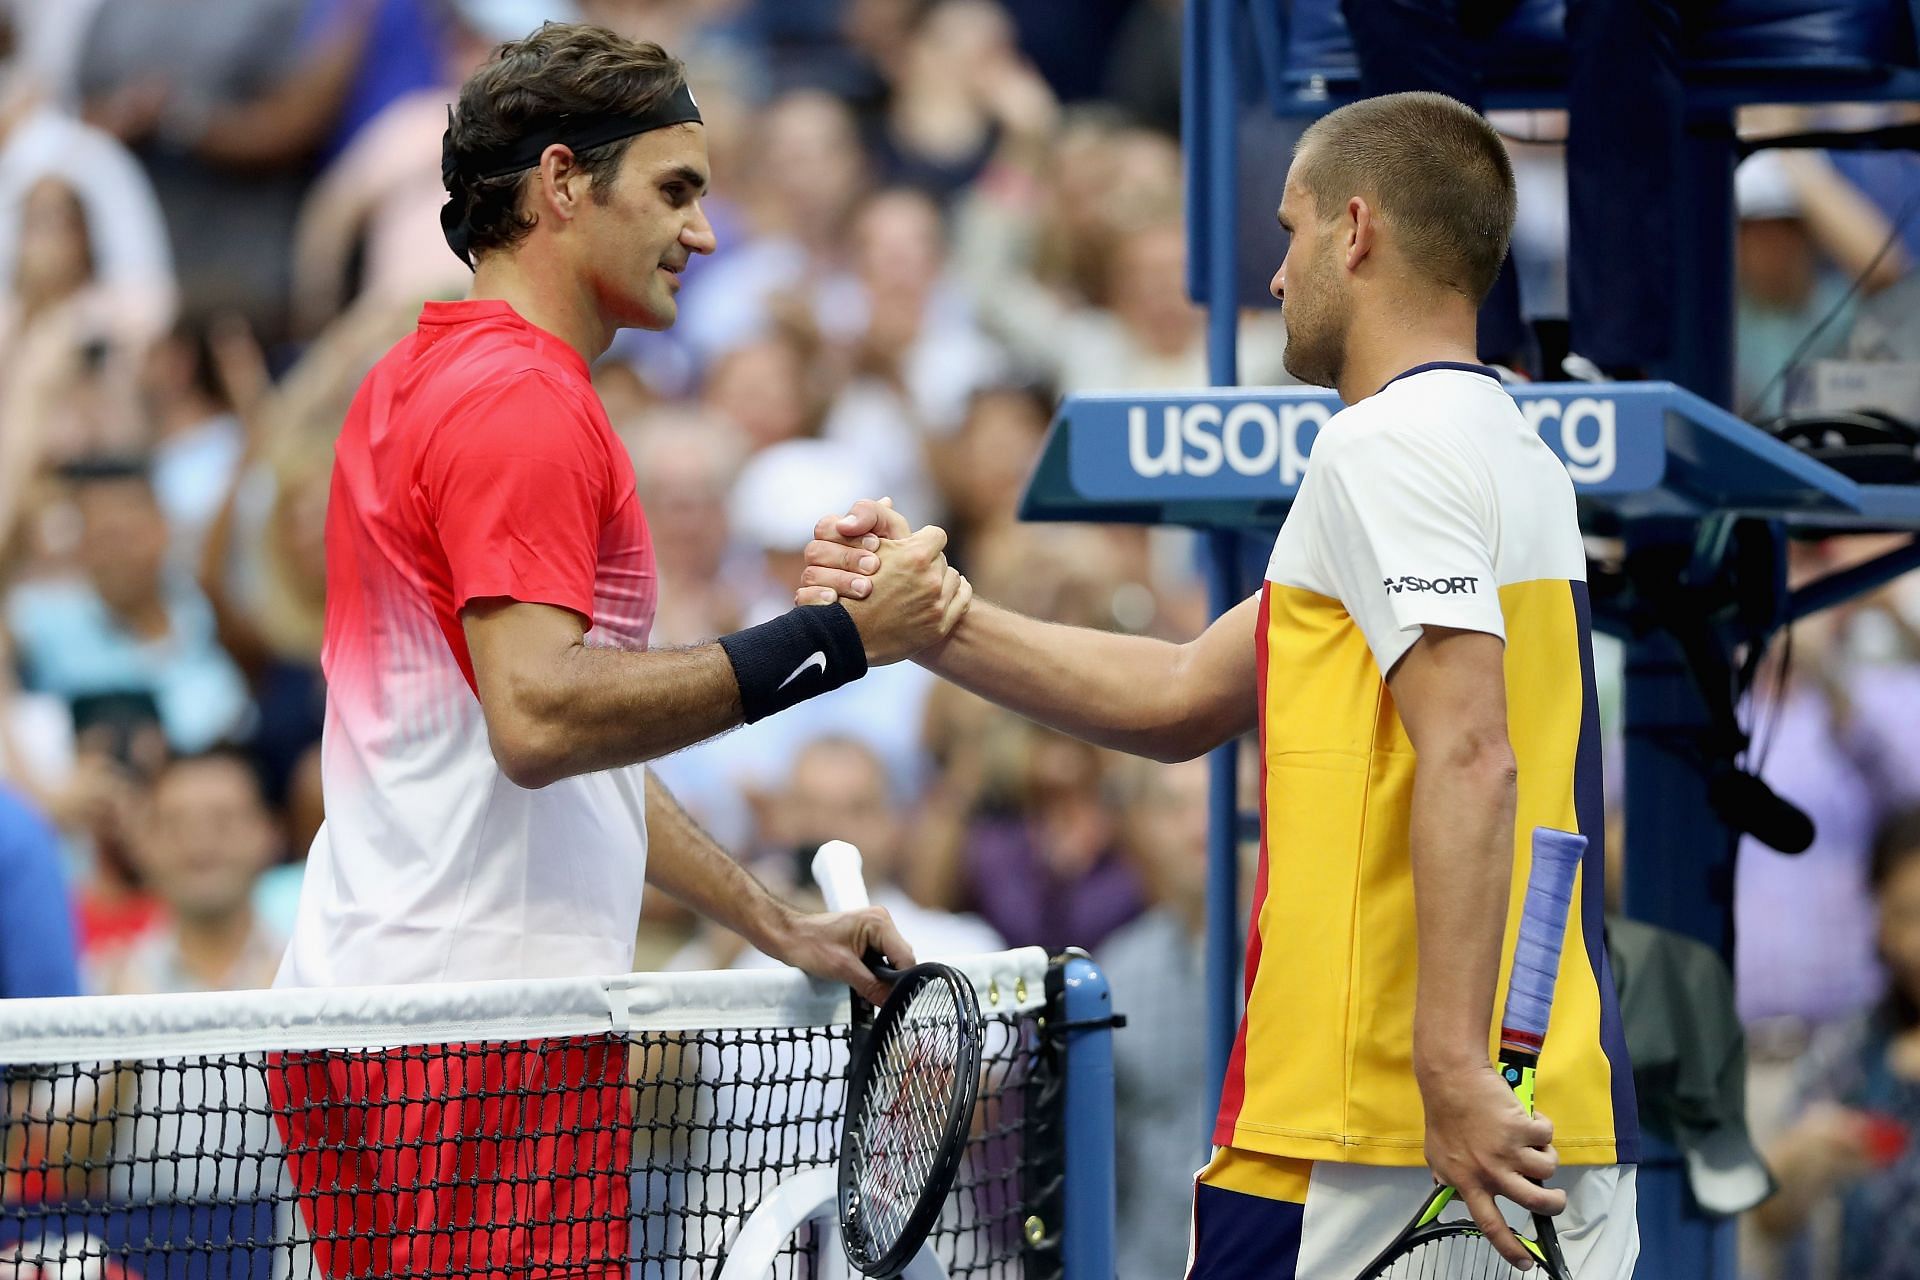 Roger Federer (left) beat Mikhail Youzhny for the 17th time at the 2017 US Open